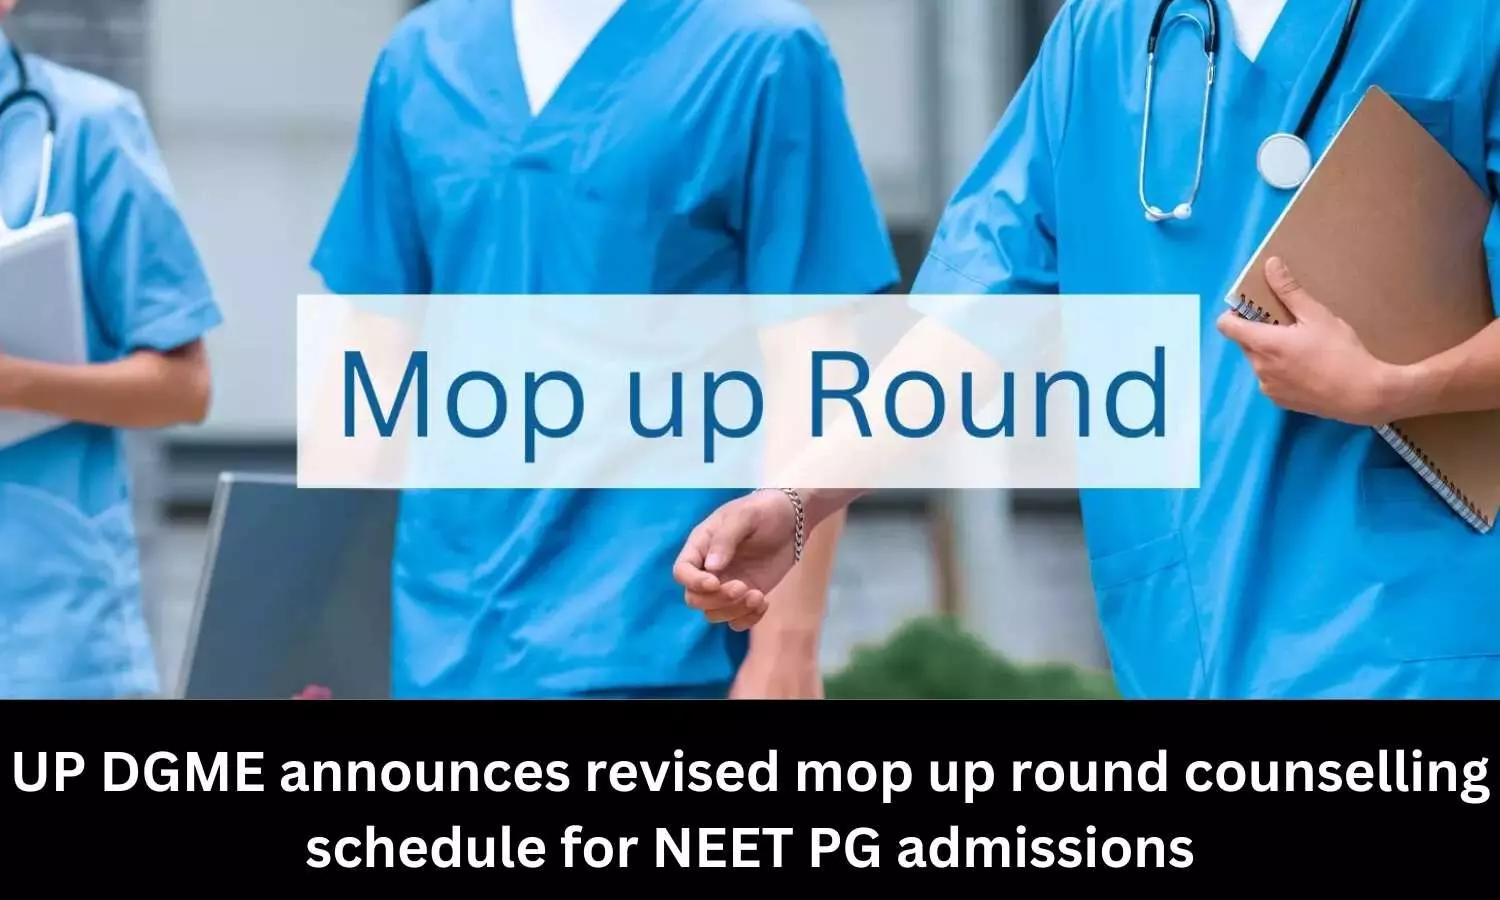 UP DGME announces revised counseling schedule for mop-up round for NEET PG admission